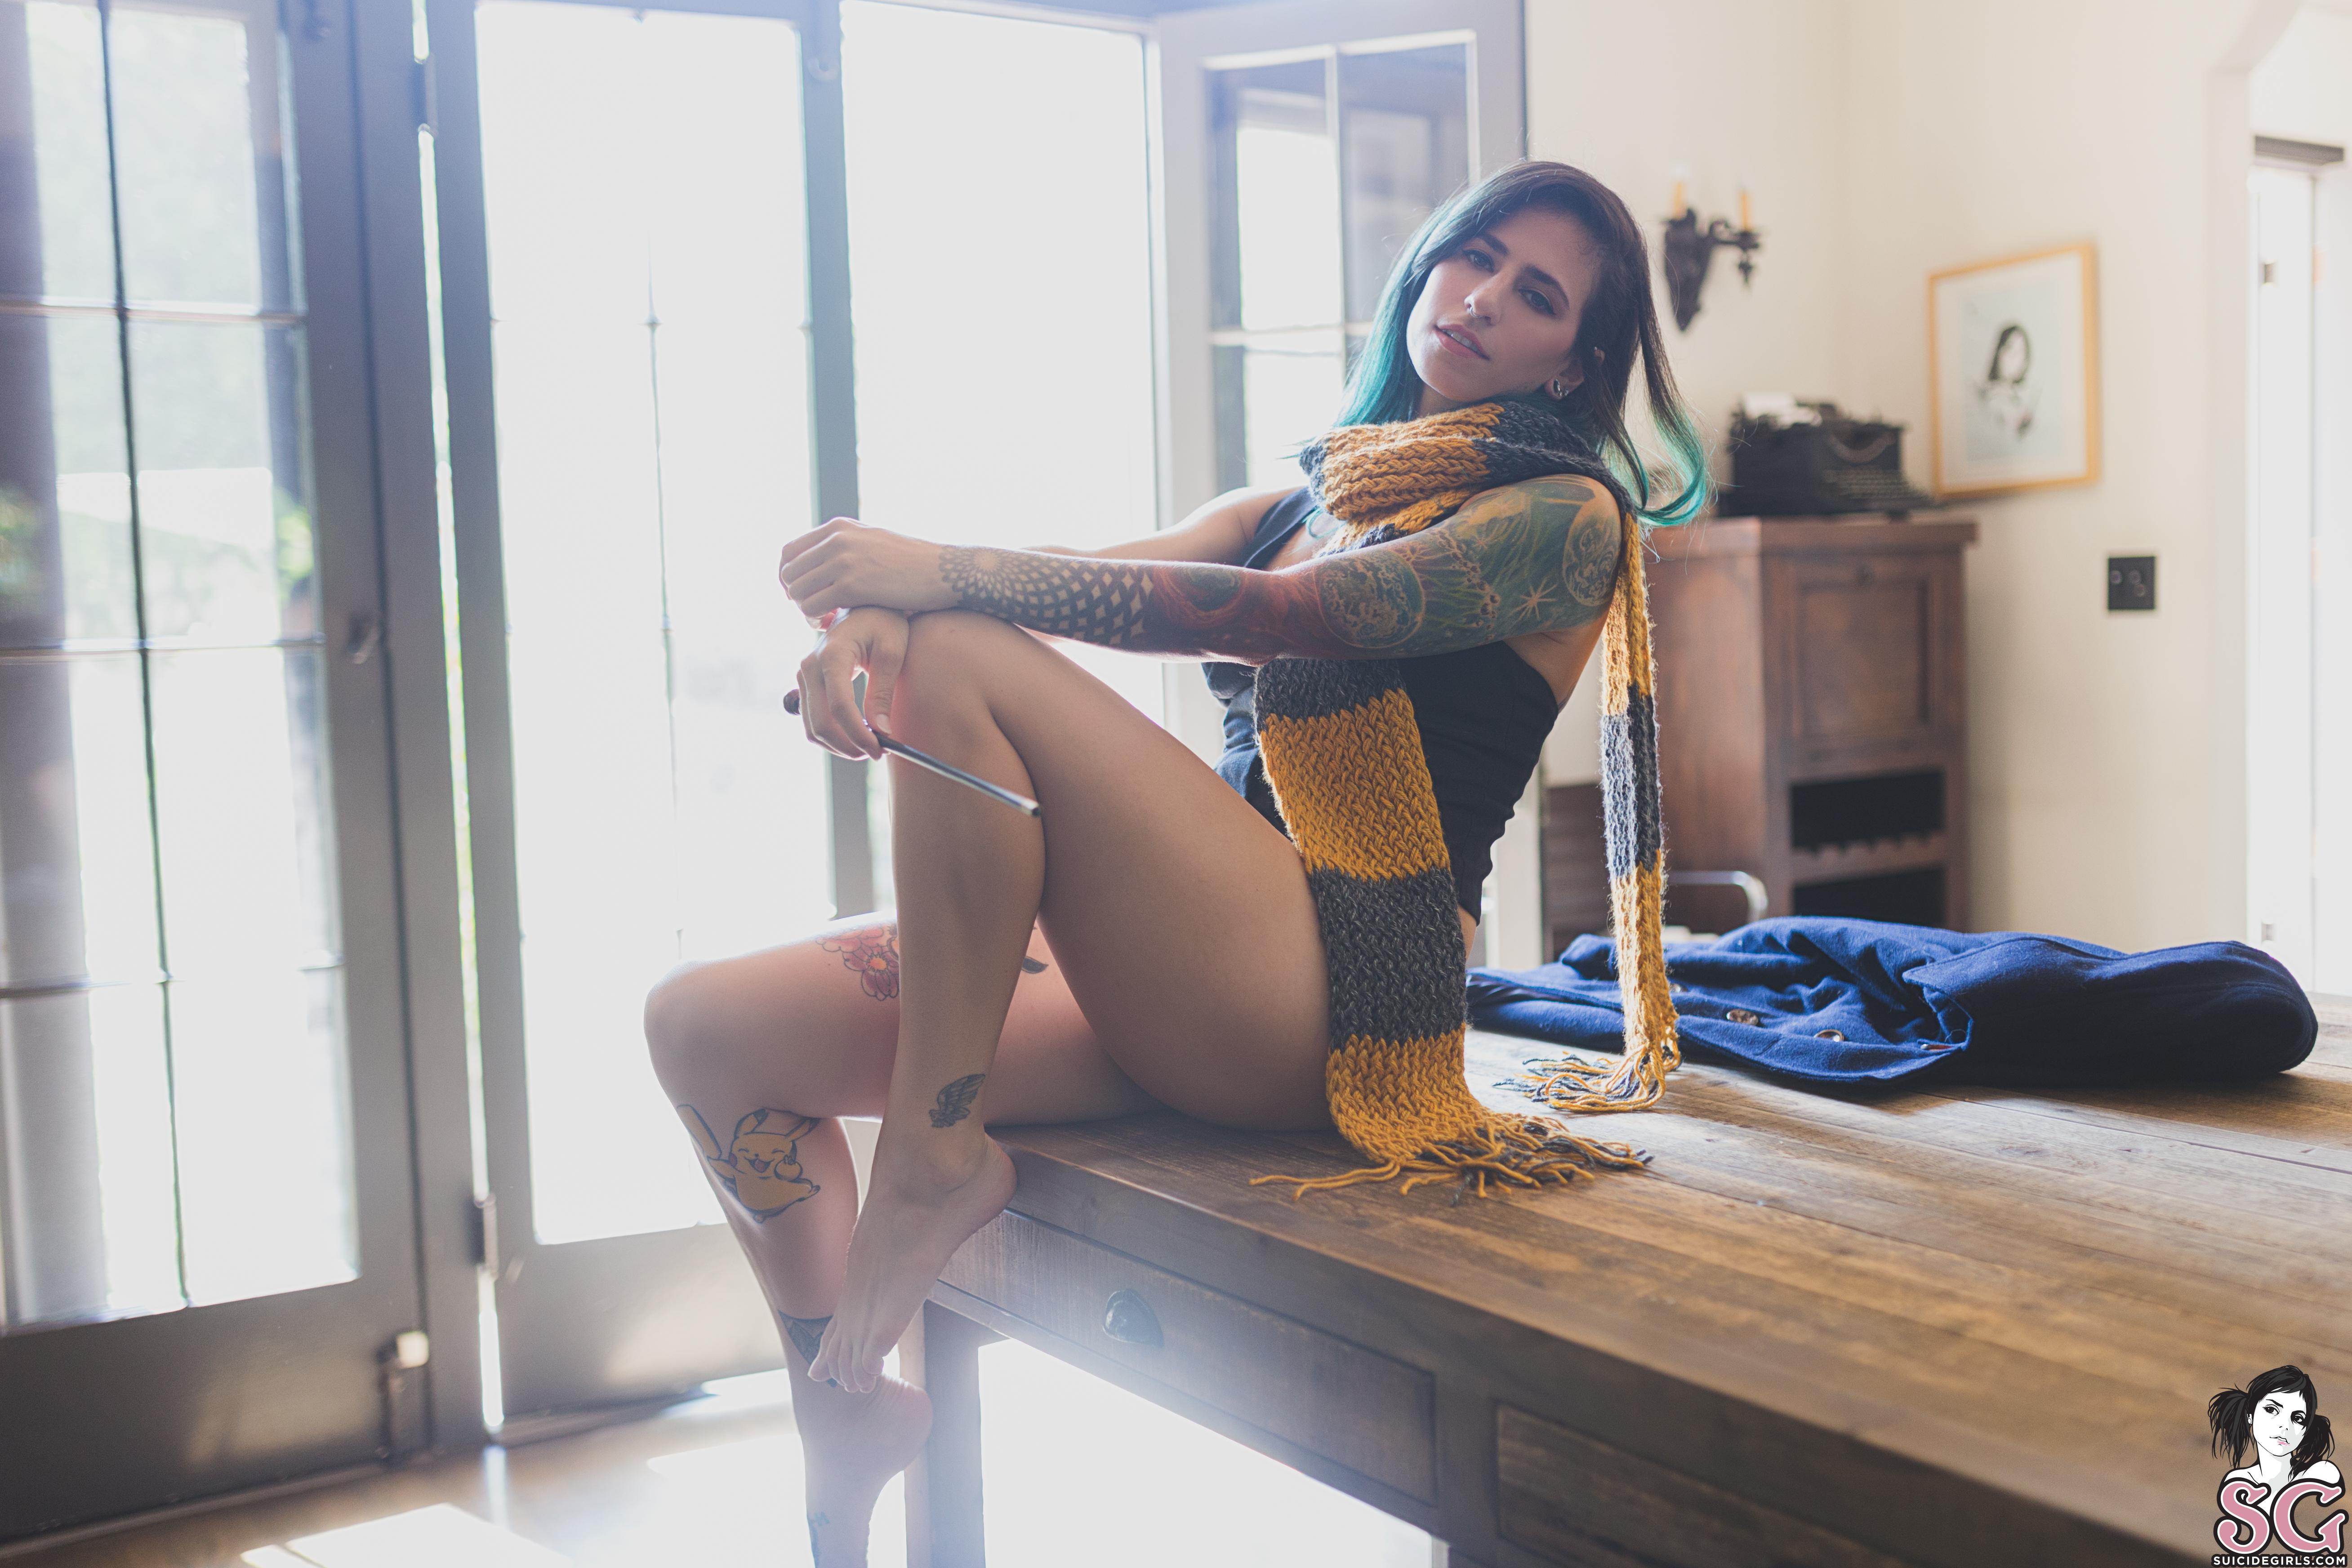 People 5232x3488 Nebula Suicide Suicide Girls tattoo dyed hair scarf Pikachu sitting women overexposed watermarked on table